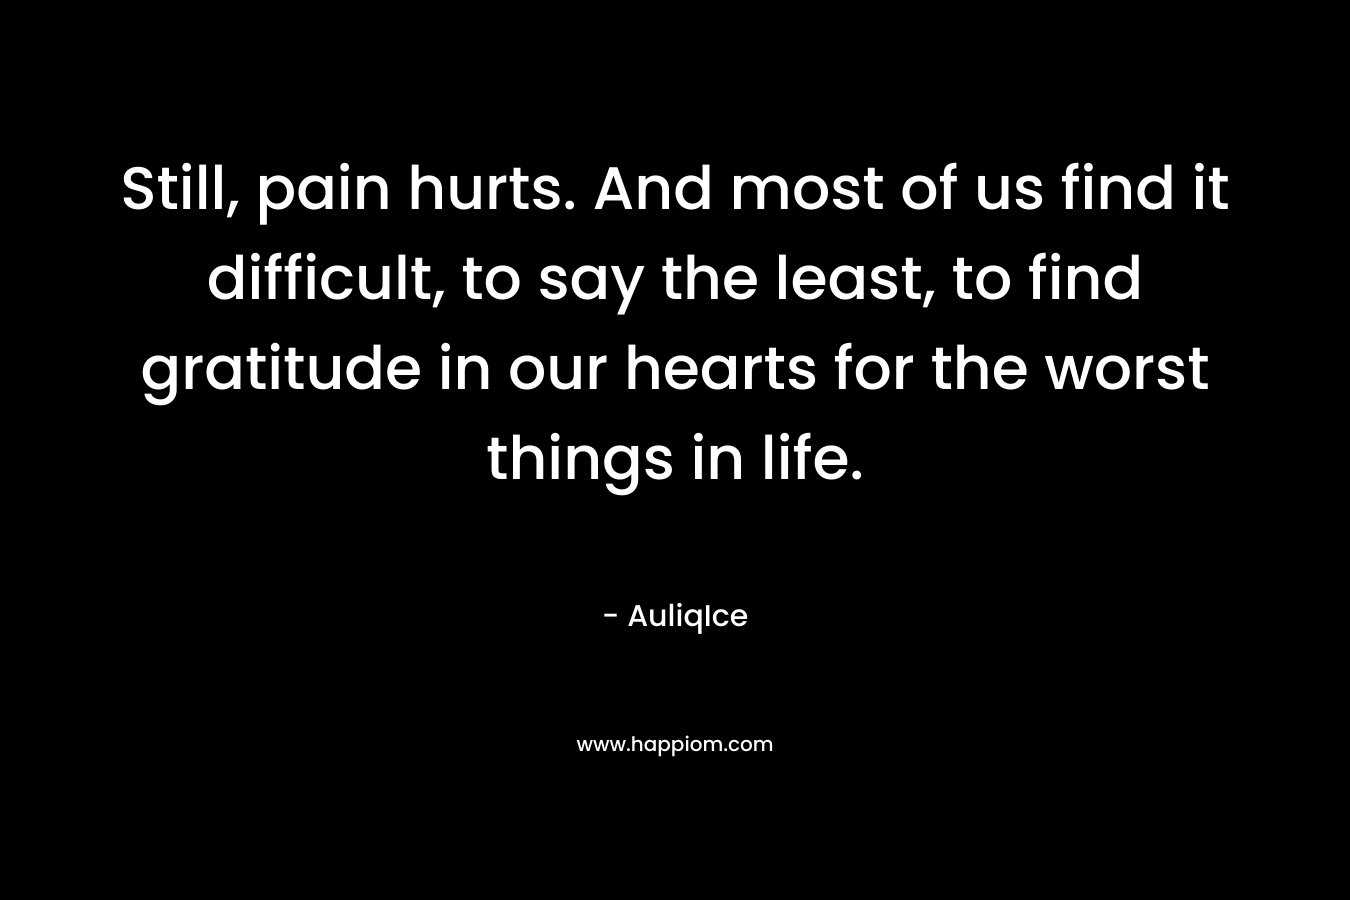 Still, pain hurts. And most of us find it difficult, to say the least, to find gratitude in our hearts for the worst things in life.